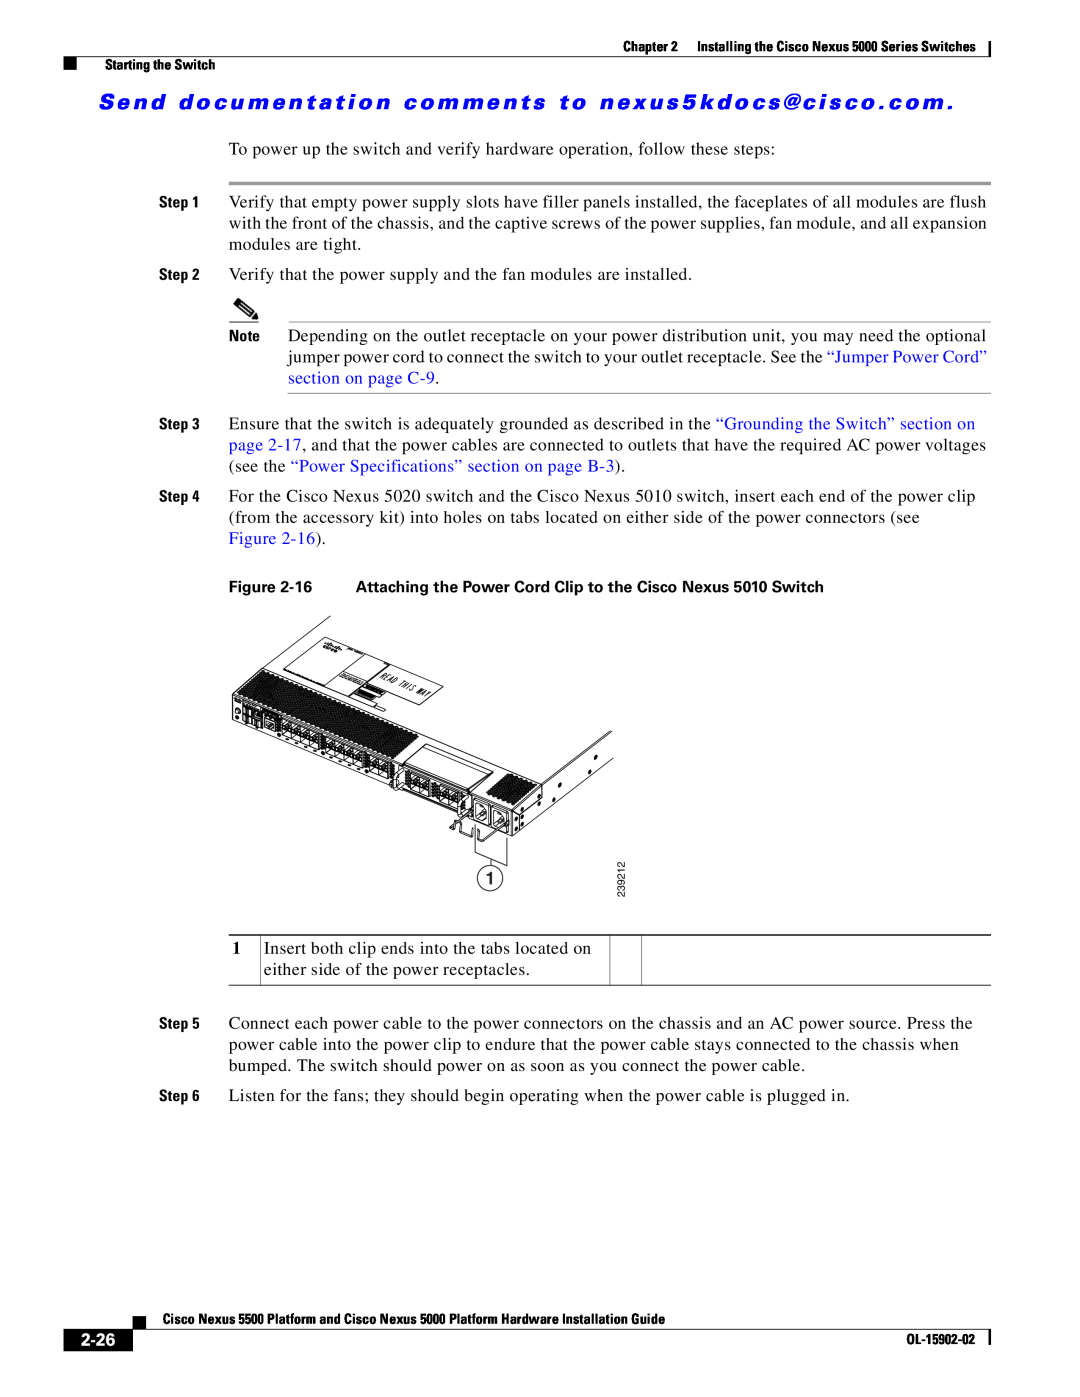 Cisco Systems 5000 manual Verify that the power supply and the fan modules are installed, 2-26 